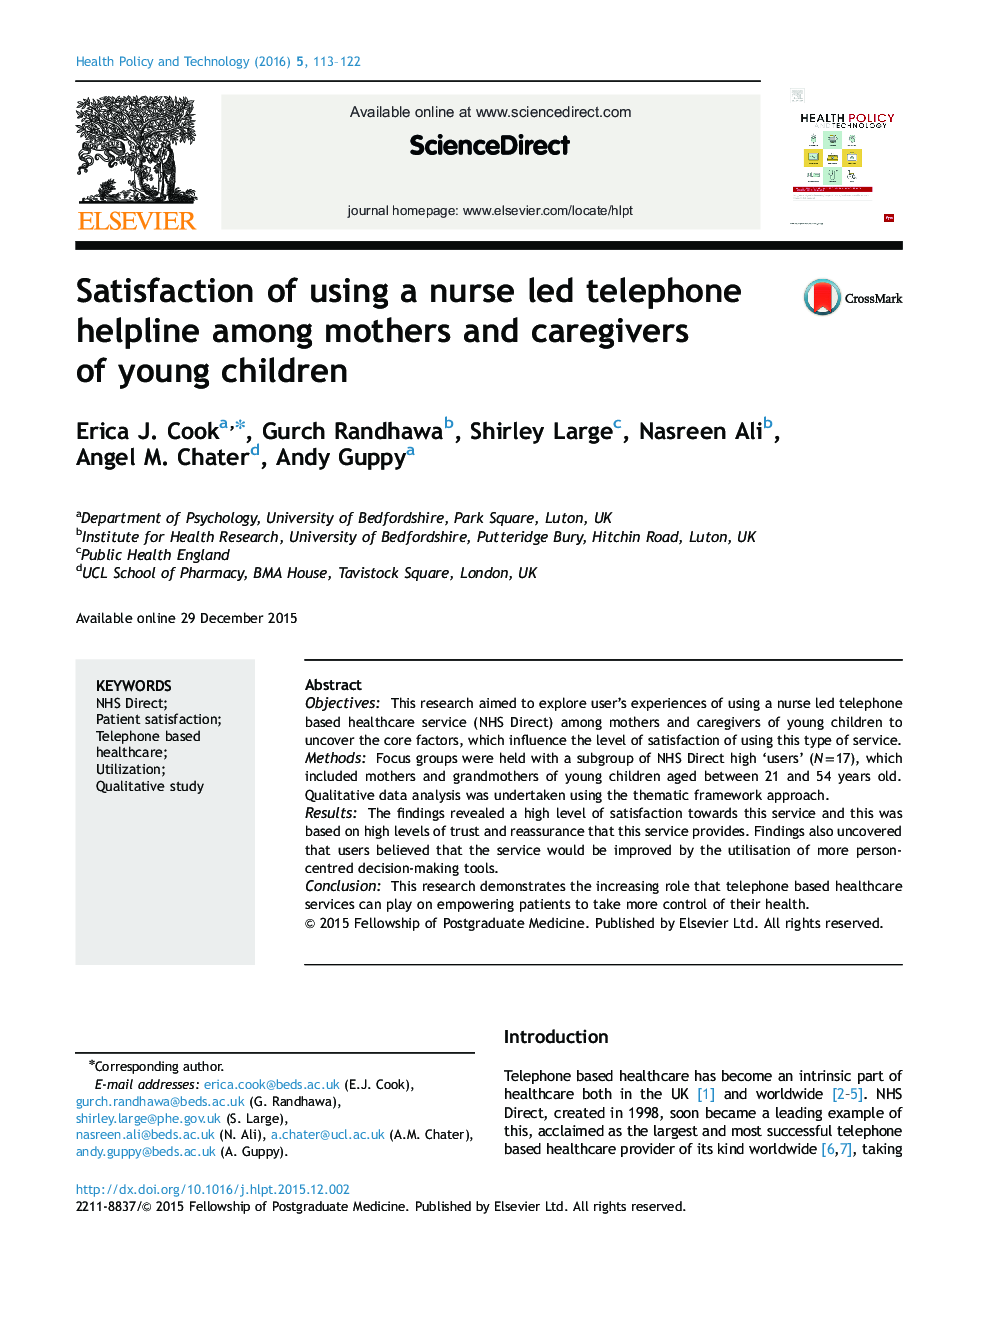 Satisfaction of using a nurse led telephone helpline among mothers and caregivers of young children